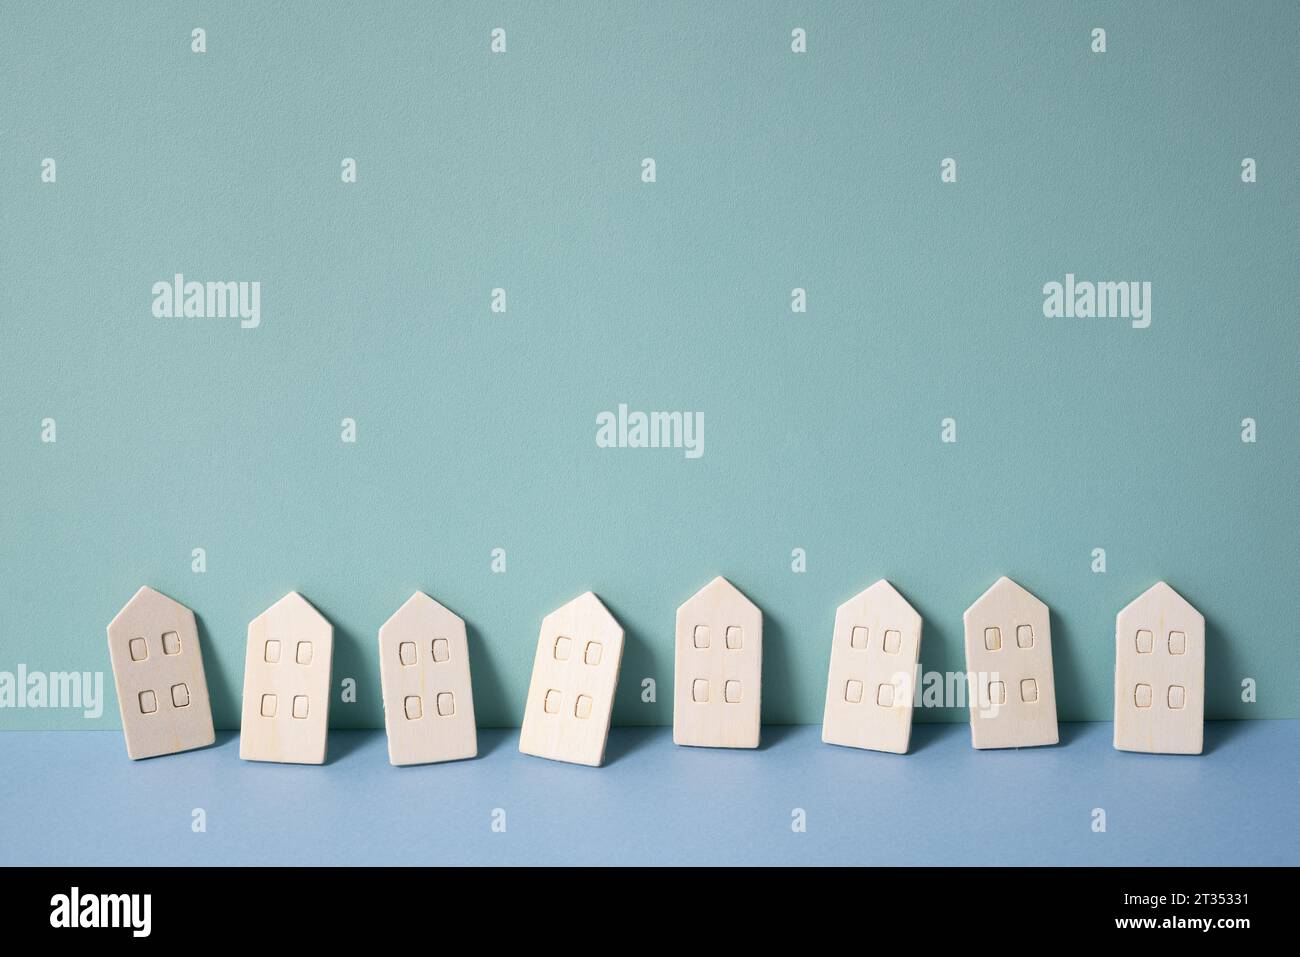 Miniature wood model house on mint blue background. rental, buy, real estate concept Stock Photo